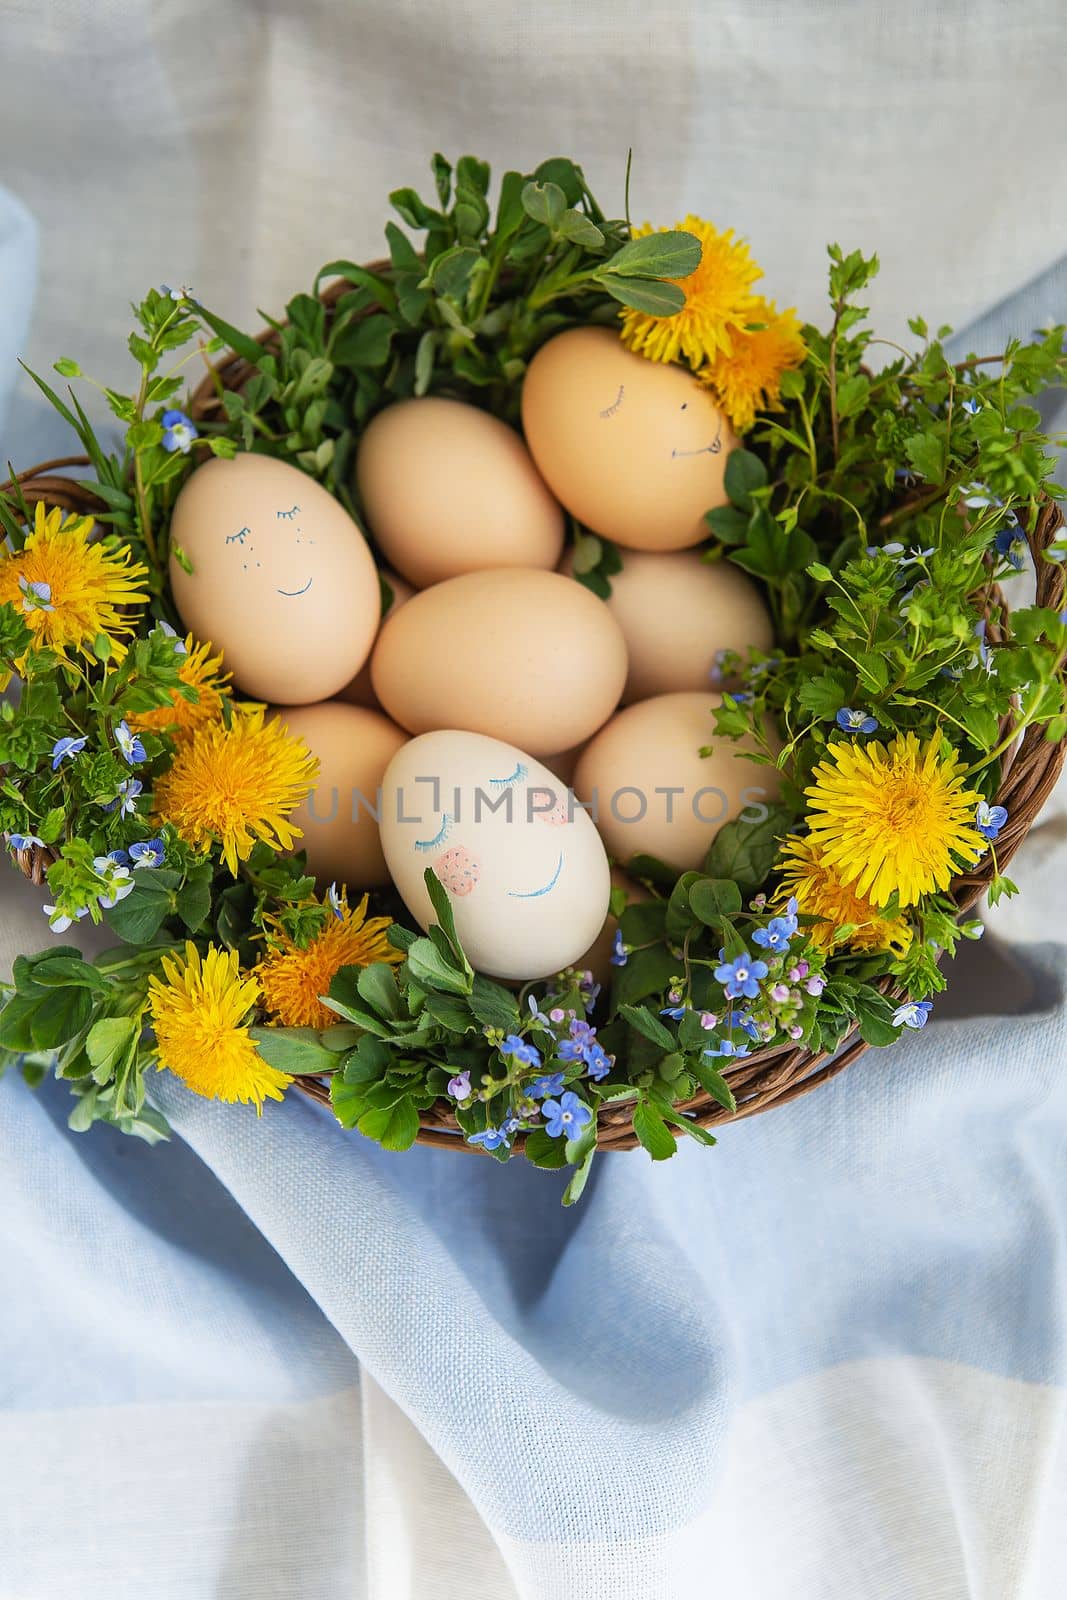 A beautiful spring bouquet in a wooden basket with Easter painted eggs, eggs with a cute face